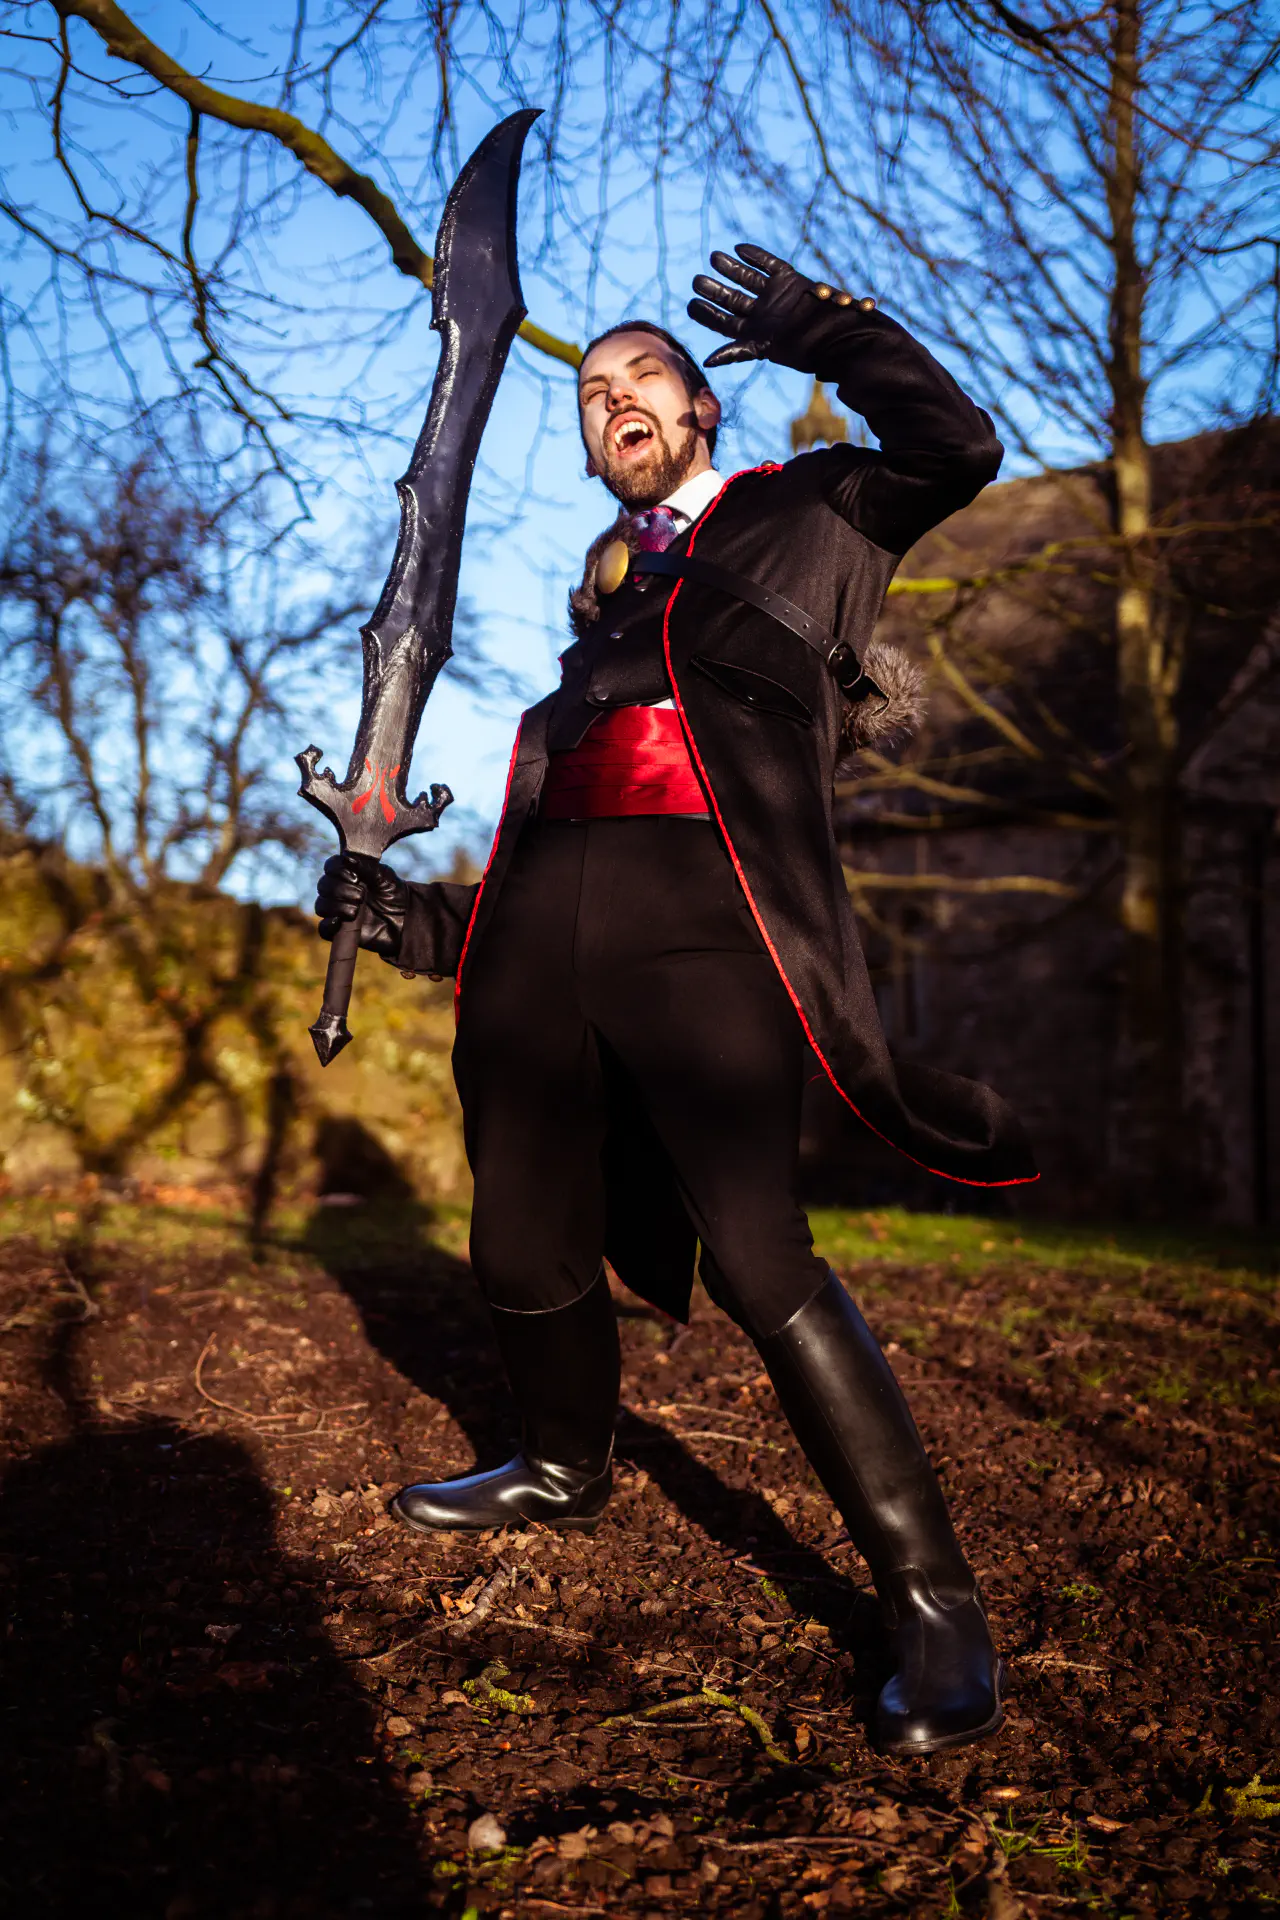 An bearded individual dressed in a black tailcoat accentuated by red accessories and wielding a black sword is recoiling from the sunlight